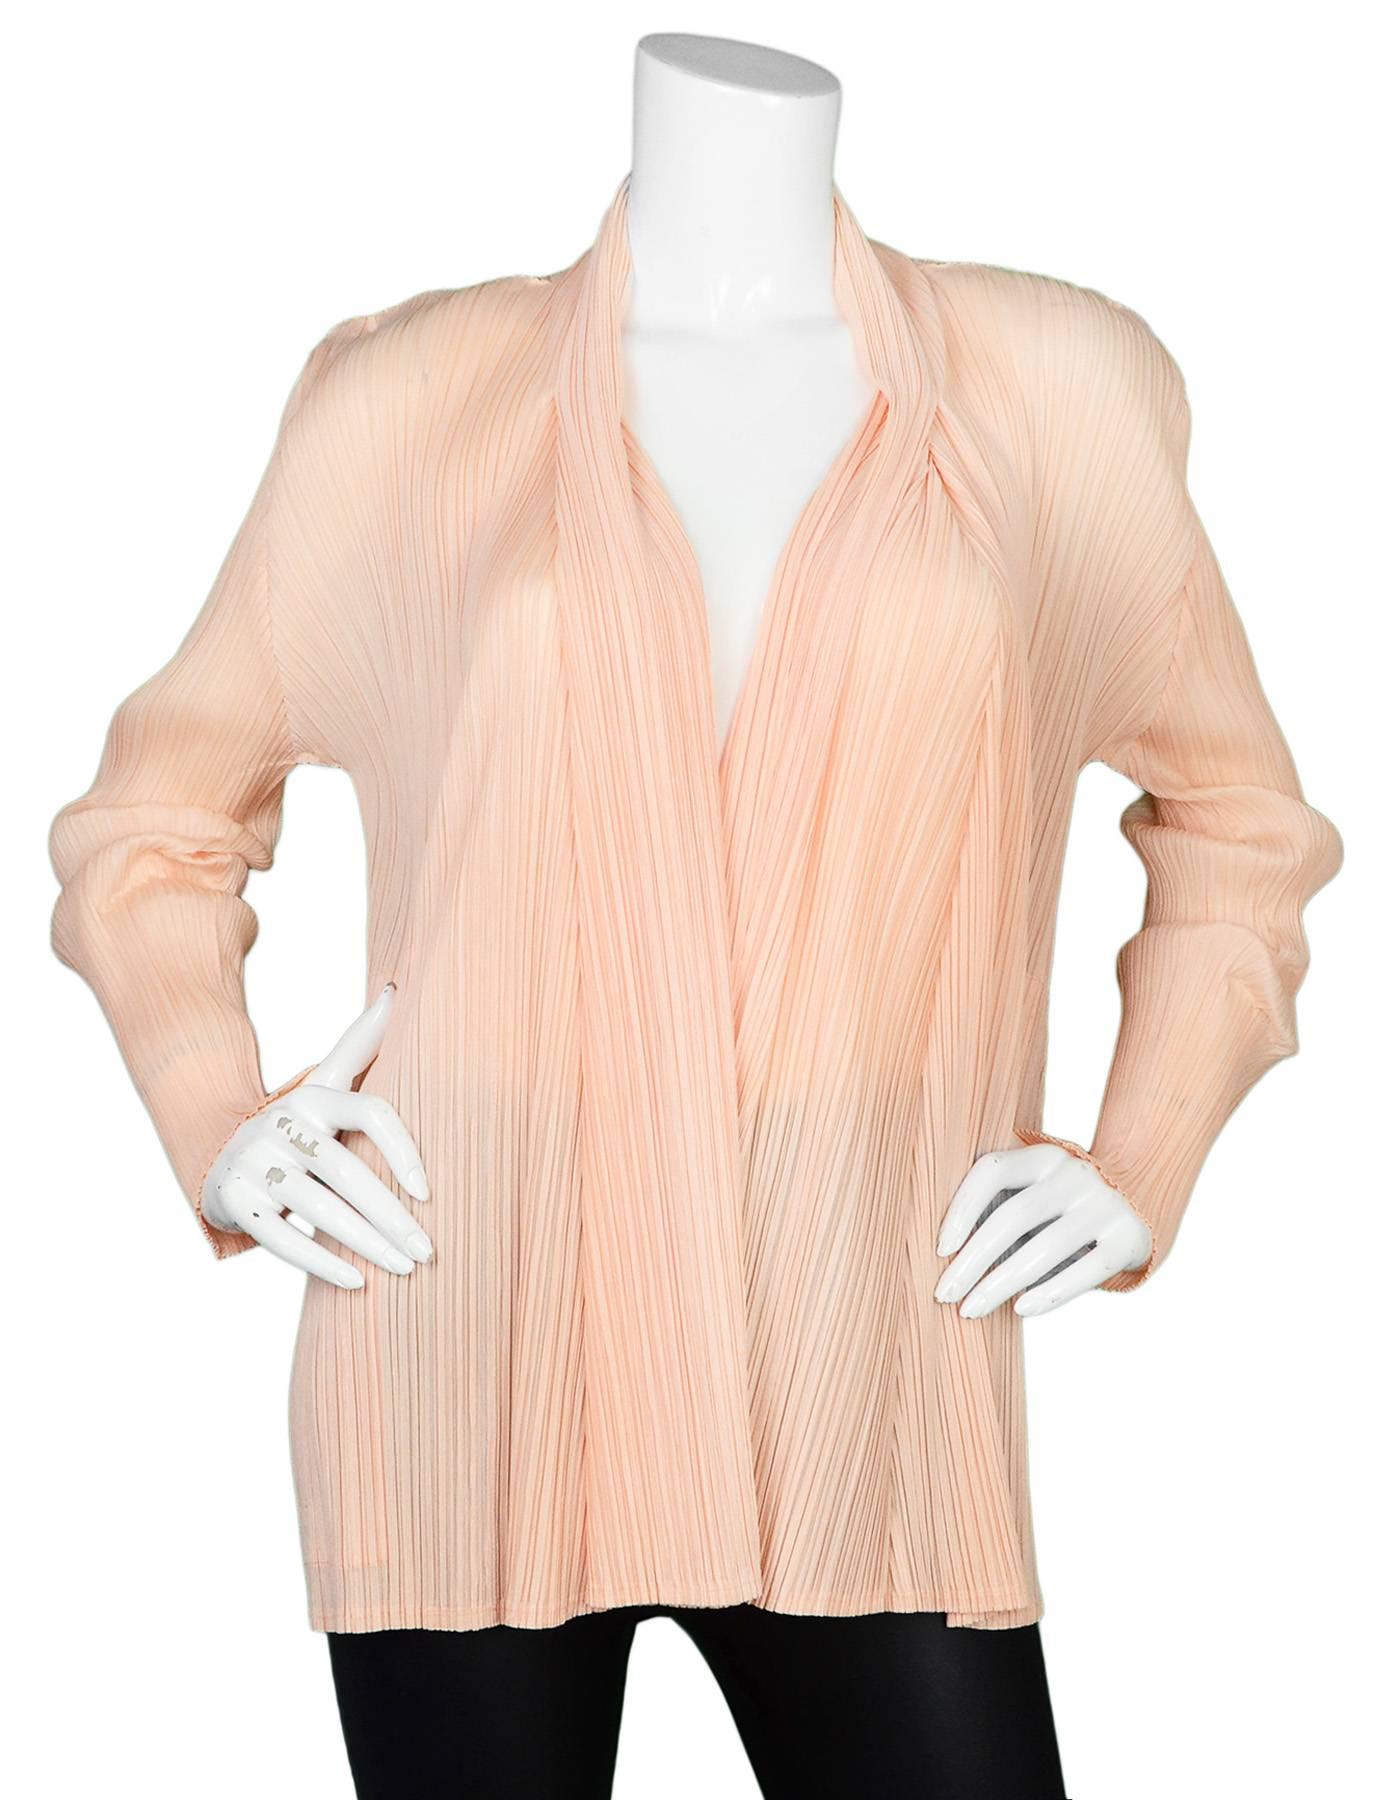 Pleats Please Peach Micro-Pleated Open Jacket
Features jagged cut hemline

Made In: Japan
Color: Peach
Composition: 100% polyester
Lining: None
Closure/Opening: Open front
Exterior Pockets: Two hip pockets
Interior Pockets: None
Overall Condition: